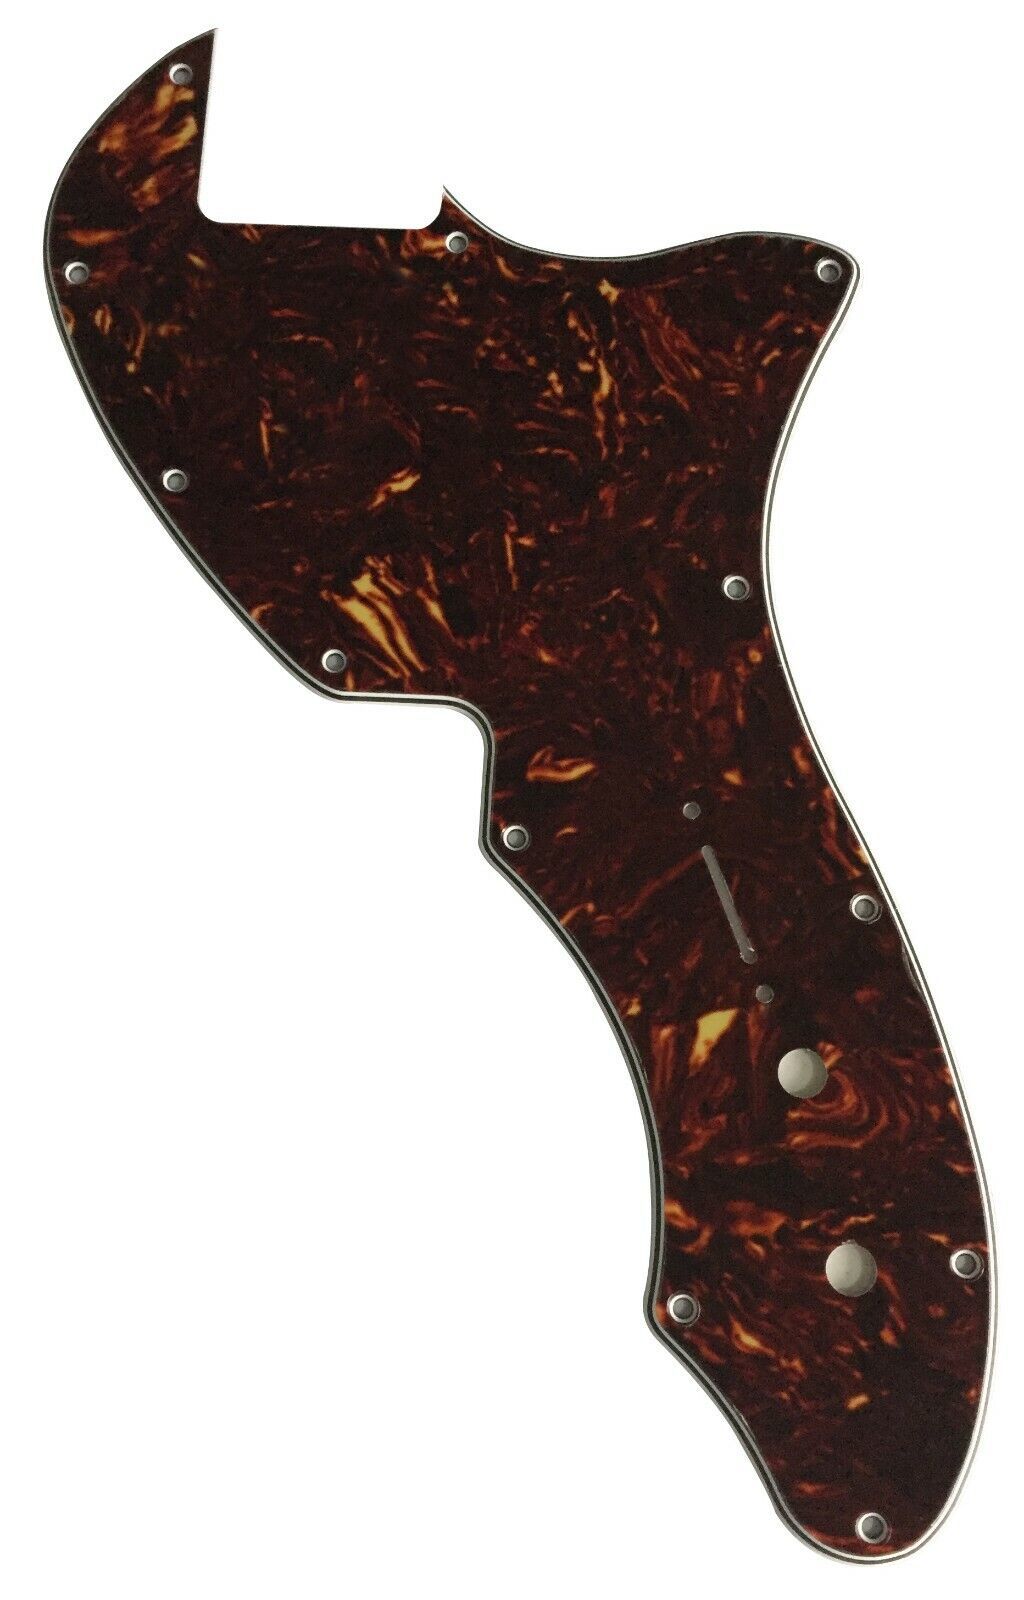 Primary image for Guitar Pickguard for Telecaster 69 Thinline Reissue Blank.4-Ply Brown Tortoise